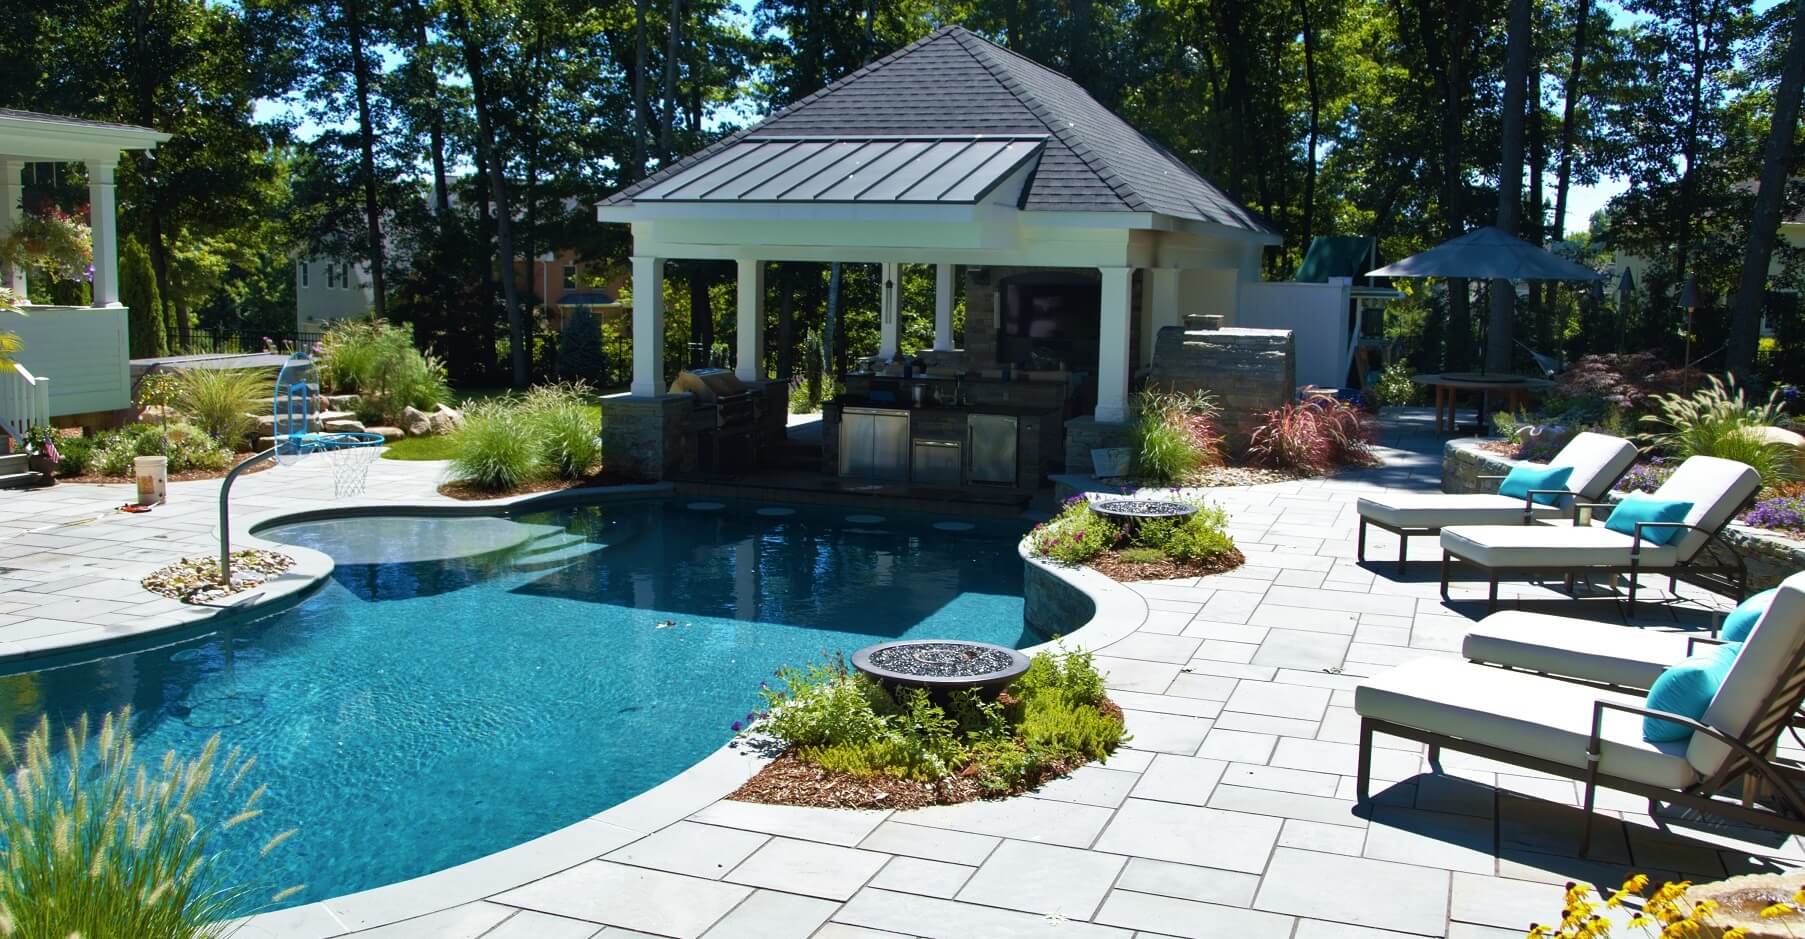 Aqua Pool & Patio gunite swimming pool construction in Connecticut showing pool with covered patio and seating